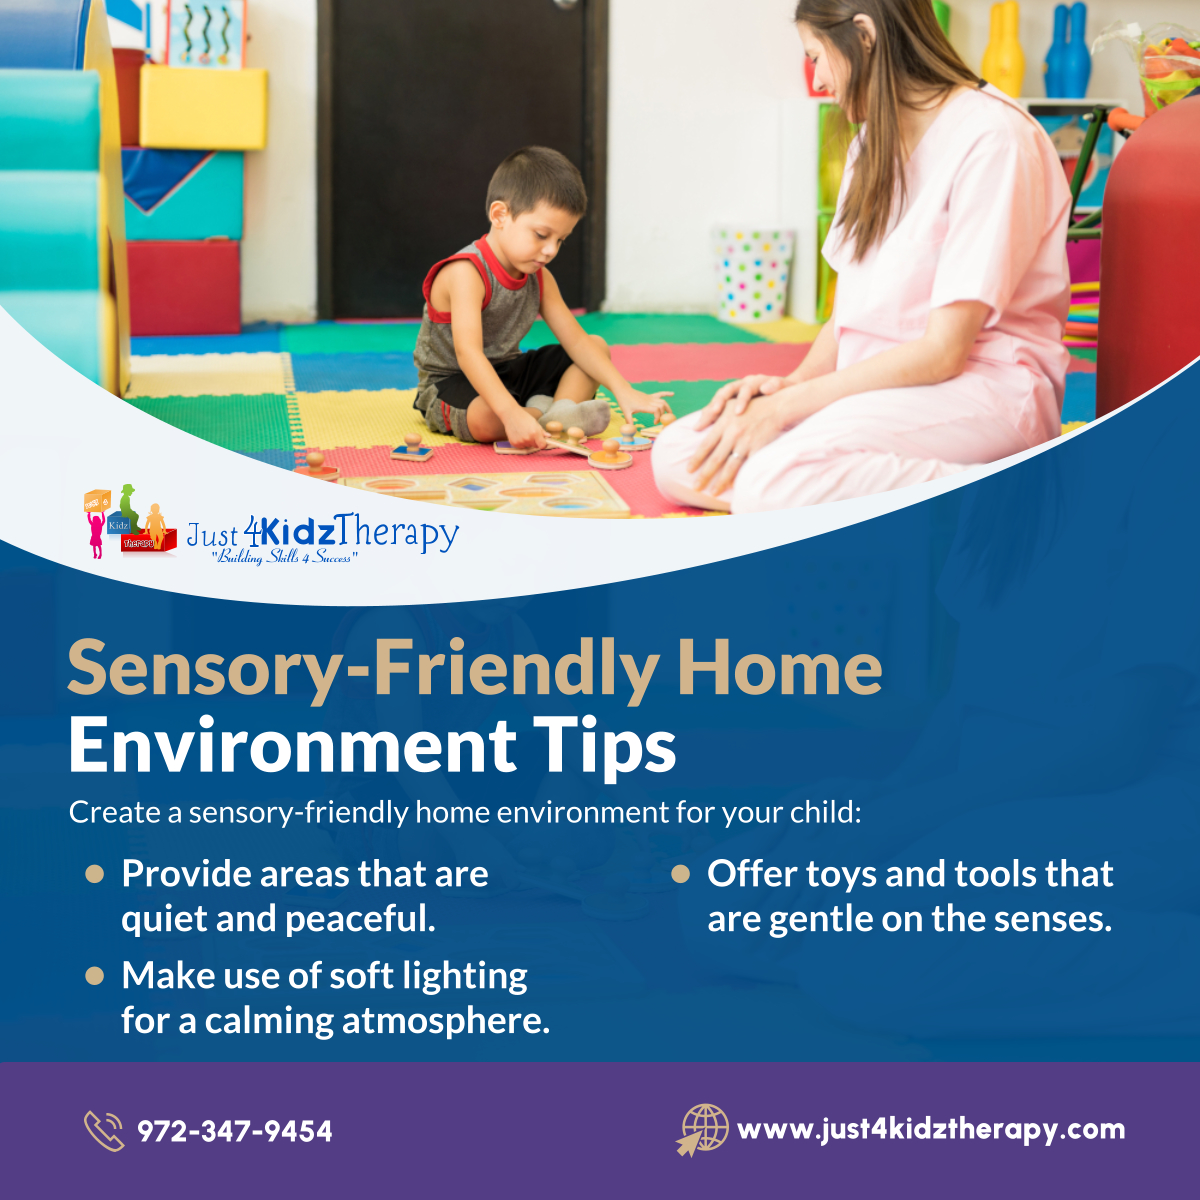 Transform your home into a supportive environment for your child with these sensory-friendly tips. Start implementing them today! 

#CollinCountyTX #PediatricTherapyServices #SensoryFriendly #HomeEnvironment #ChildDevelopment